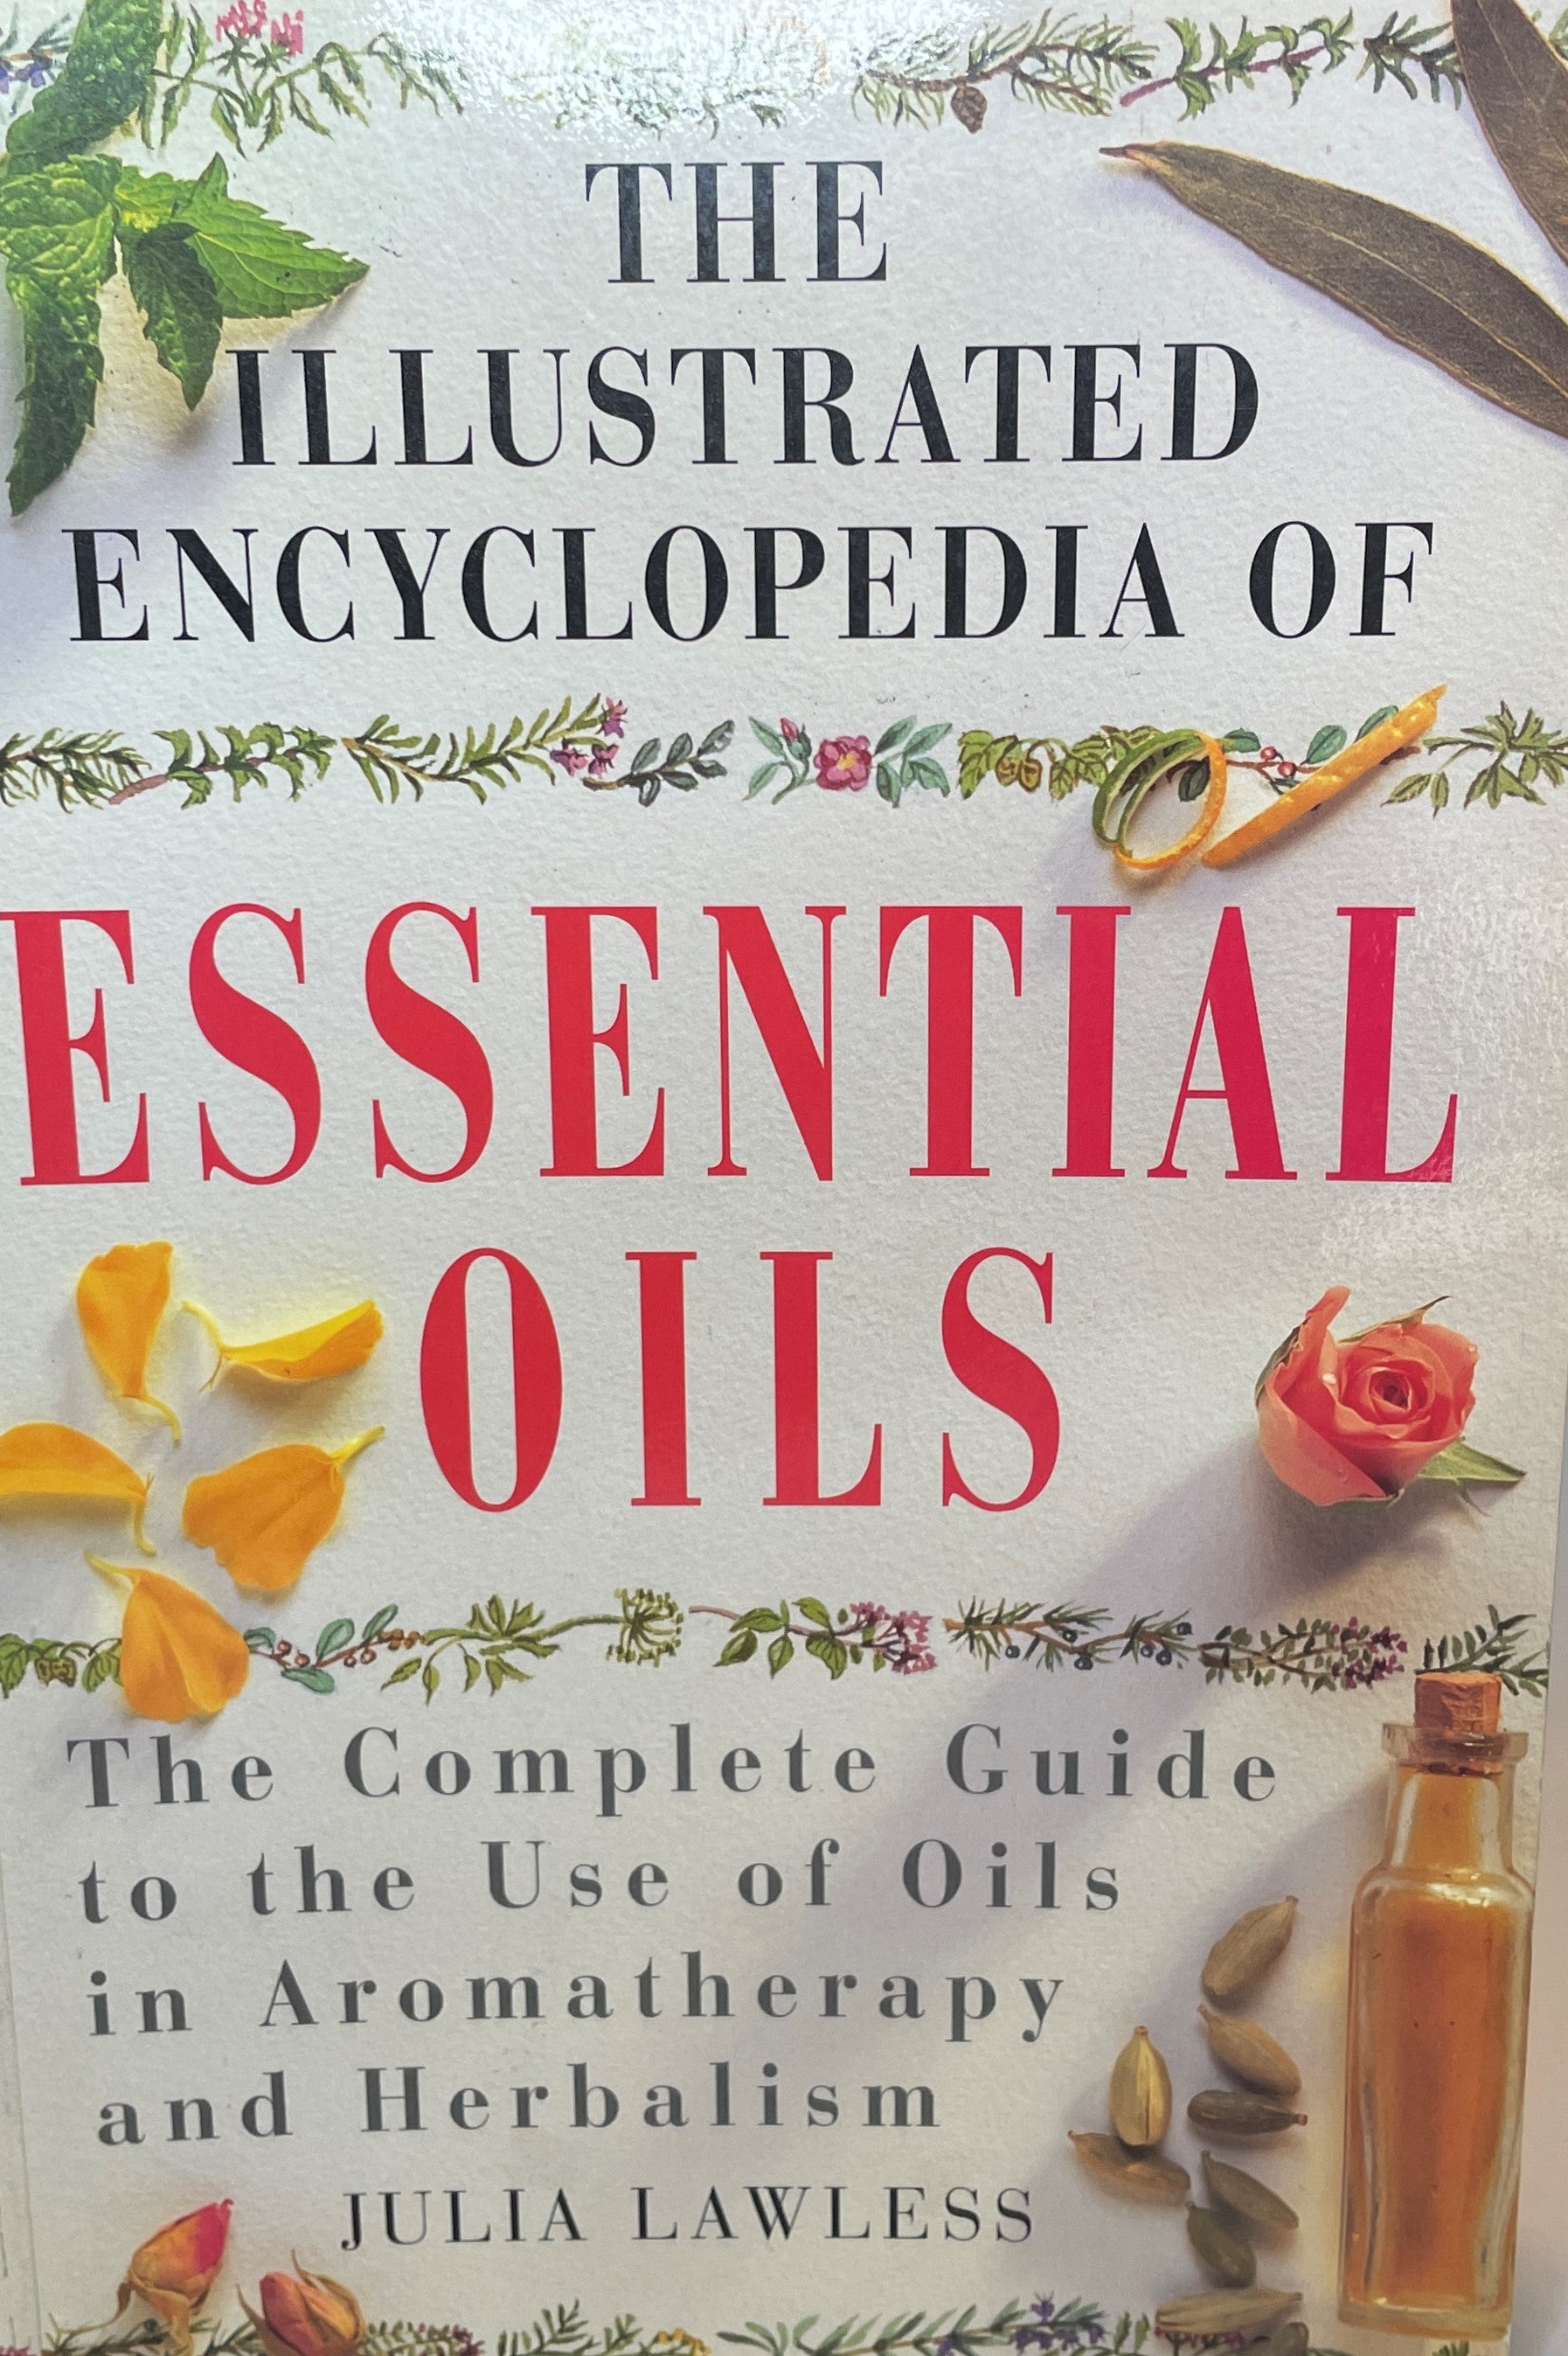 The Illustrated Encyclopedia of Essential Oils - The Complete Guide to the Use of Oils in Aromatherapy and Herbalism By Julia Lawless, Oilblends products, uncle benneys, soaps that heal natural education books